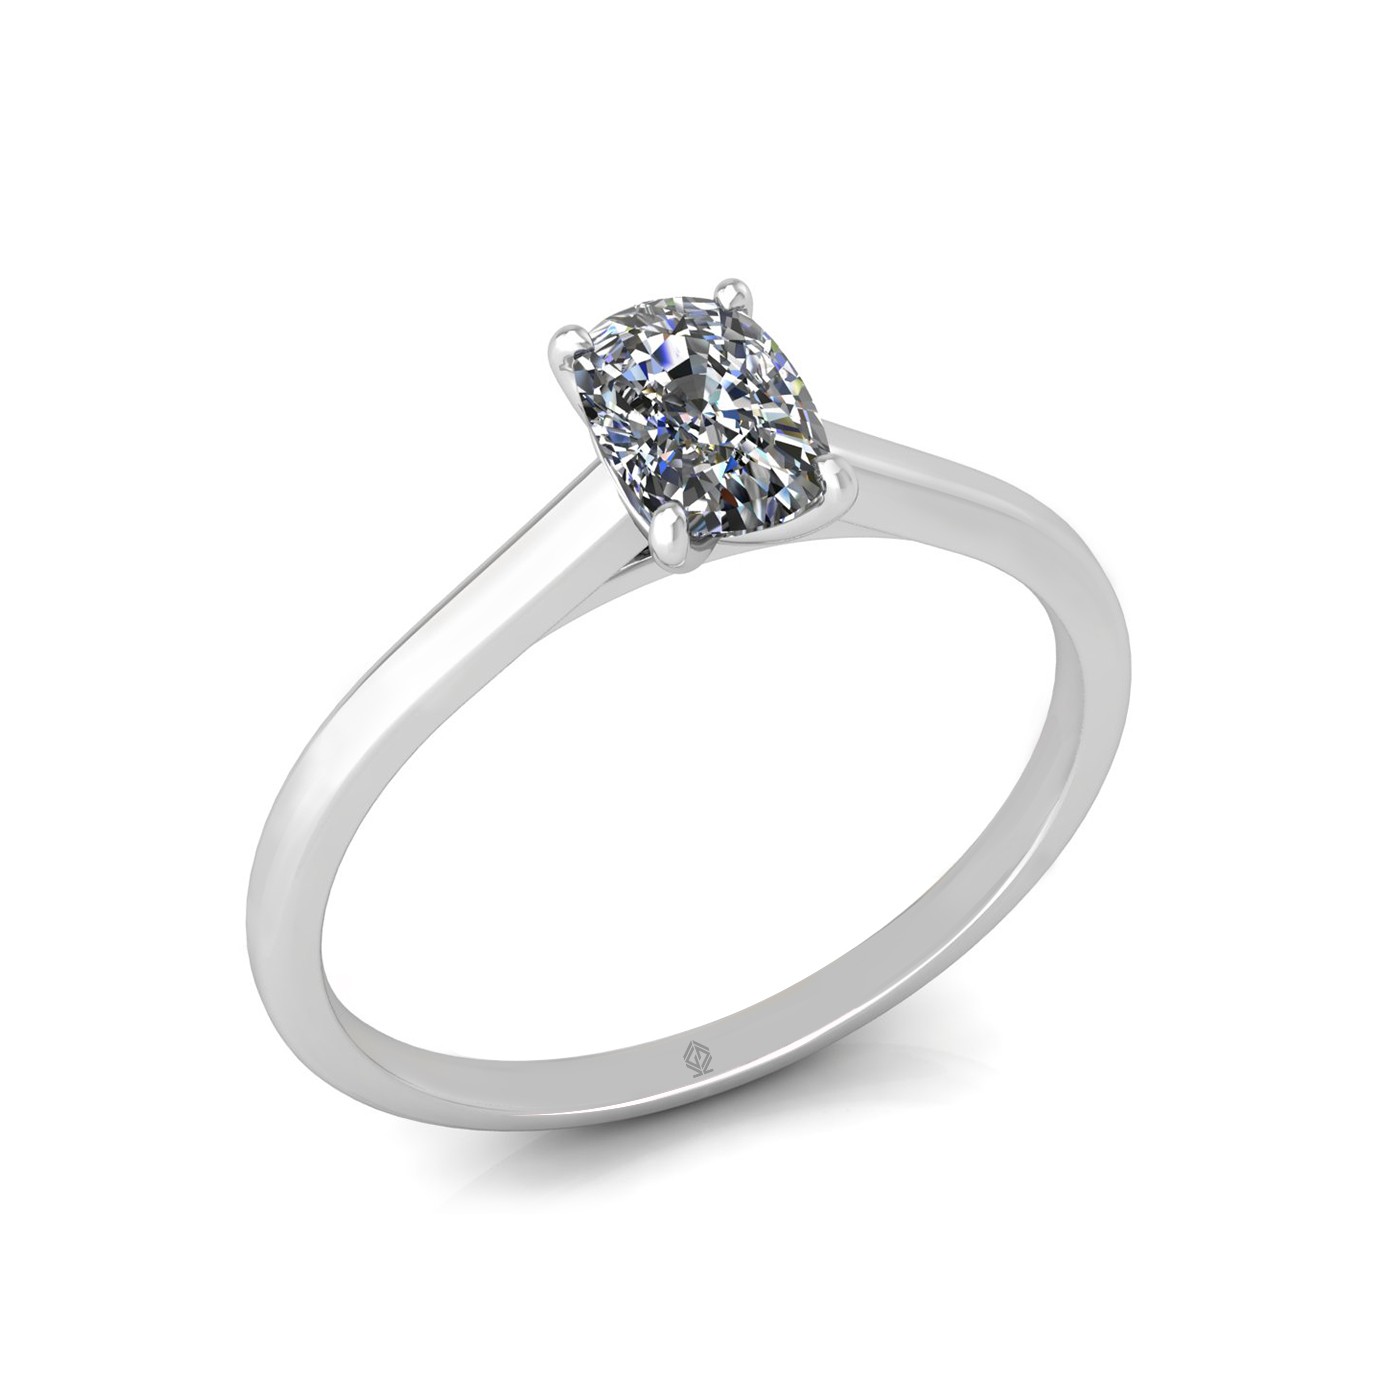 18k white gold  0,80 ct 4 prongs solitaire elongated cushion cut diamond engagement ring with whisper thin band